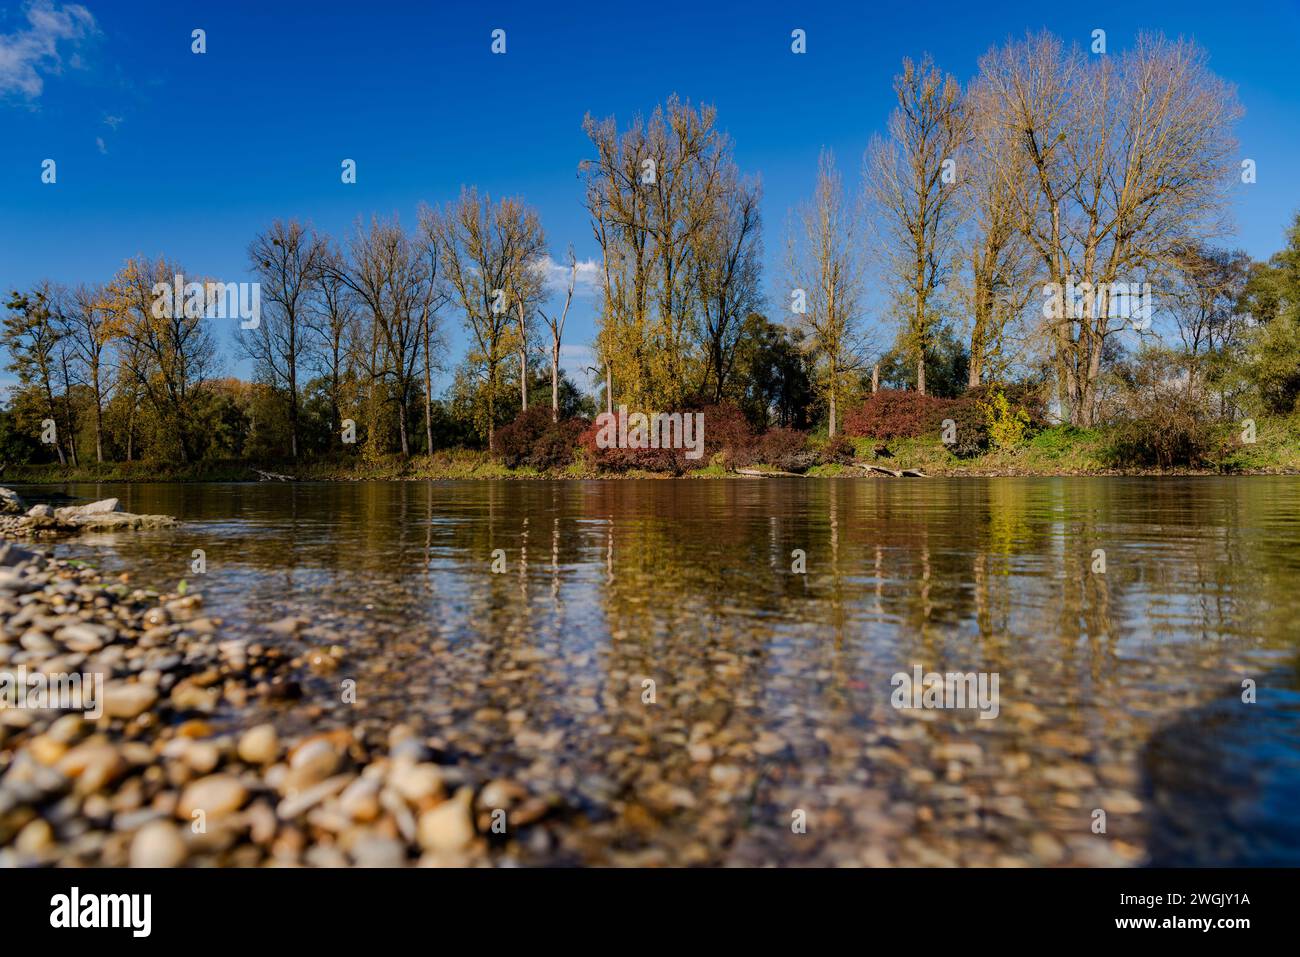 At the Isar river, Lower Bavaria, Germany Stock Photo